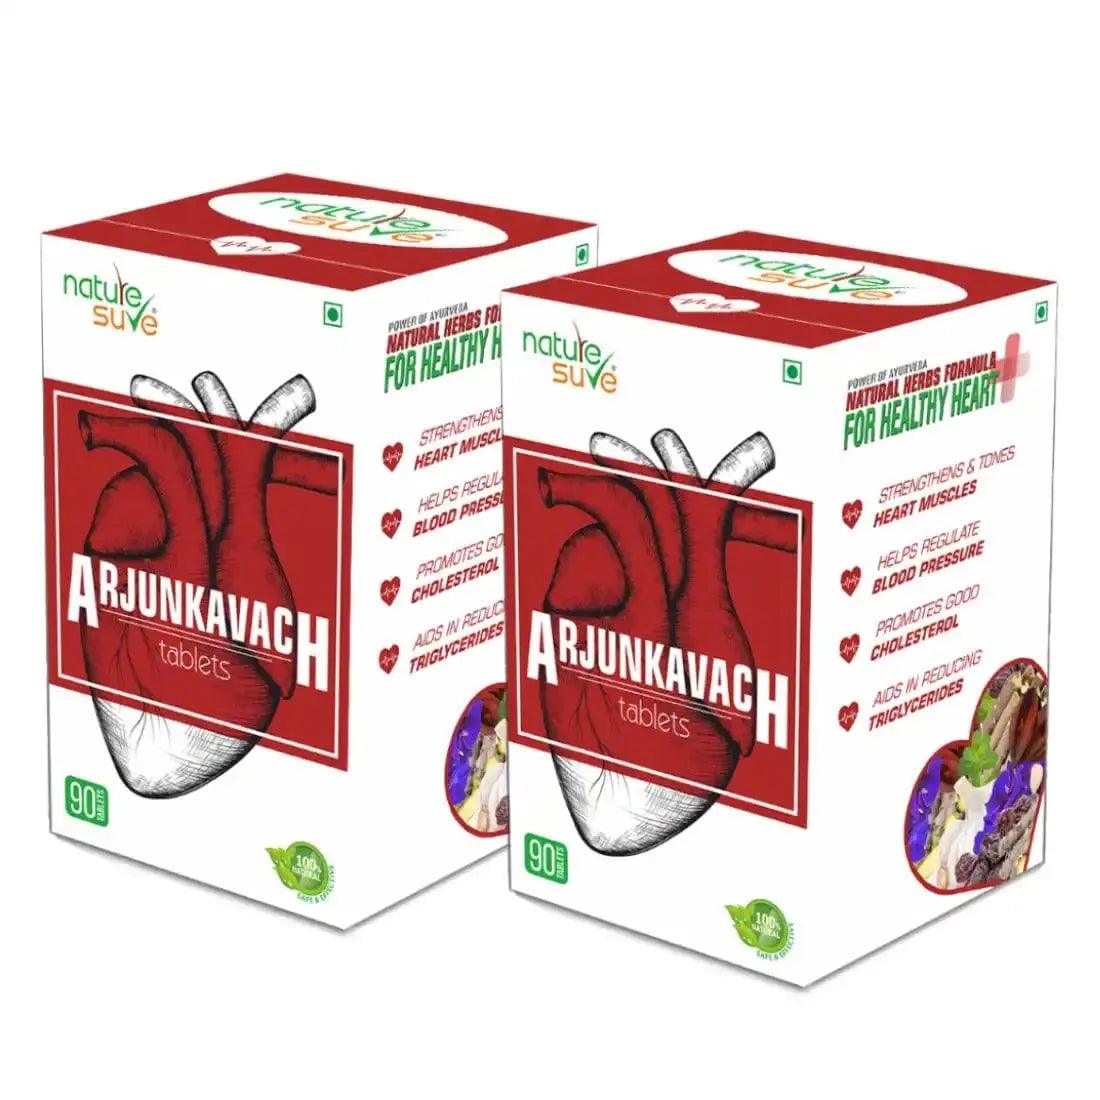 Buy 2 Packs of Nature Sure Arjun Kavach Tablets for Healthy Heart in Men and Women